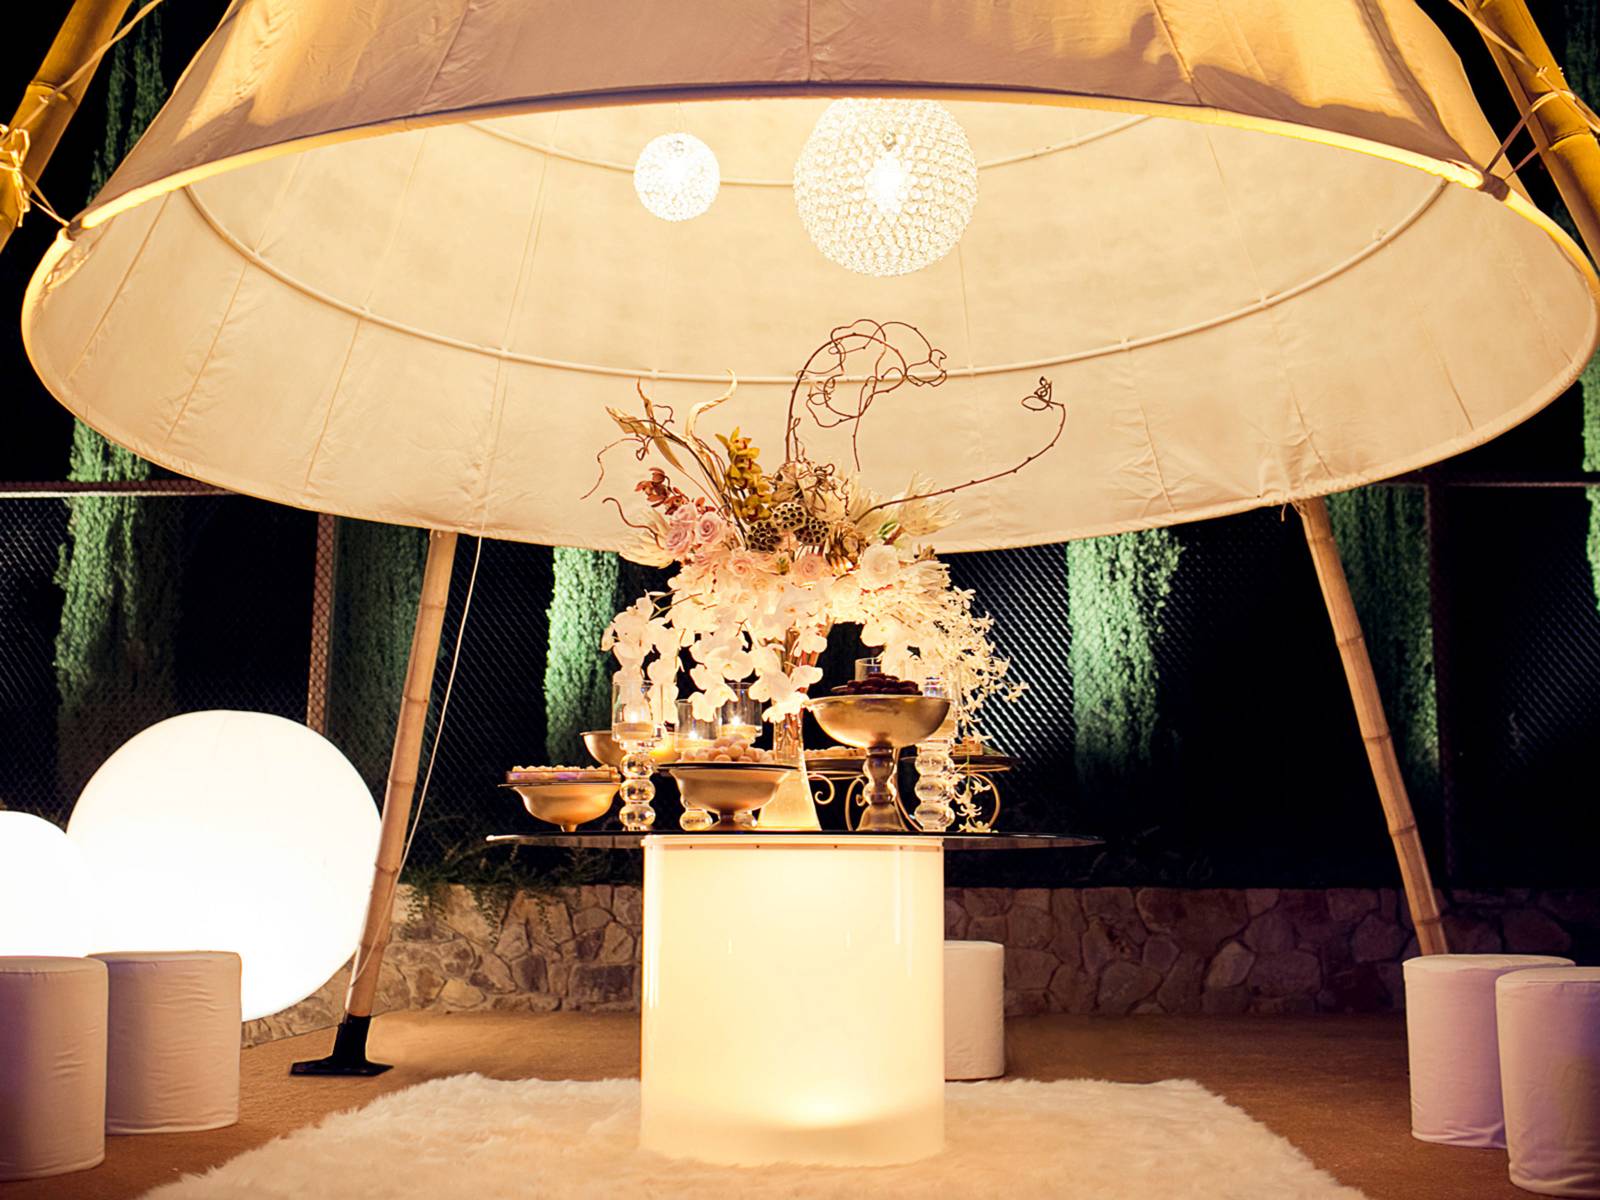 Dessert table with lush gold decor under a giant canvas Tepee